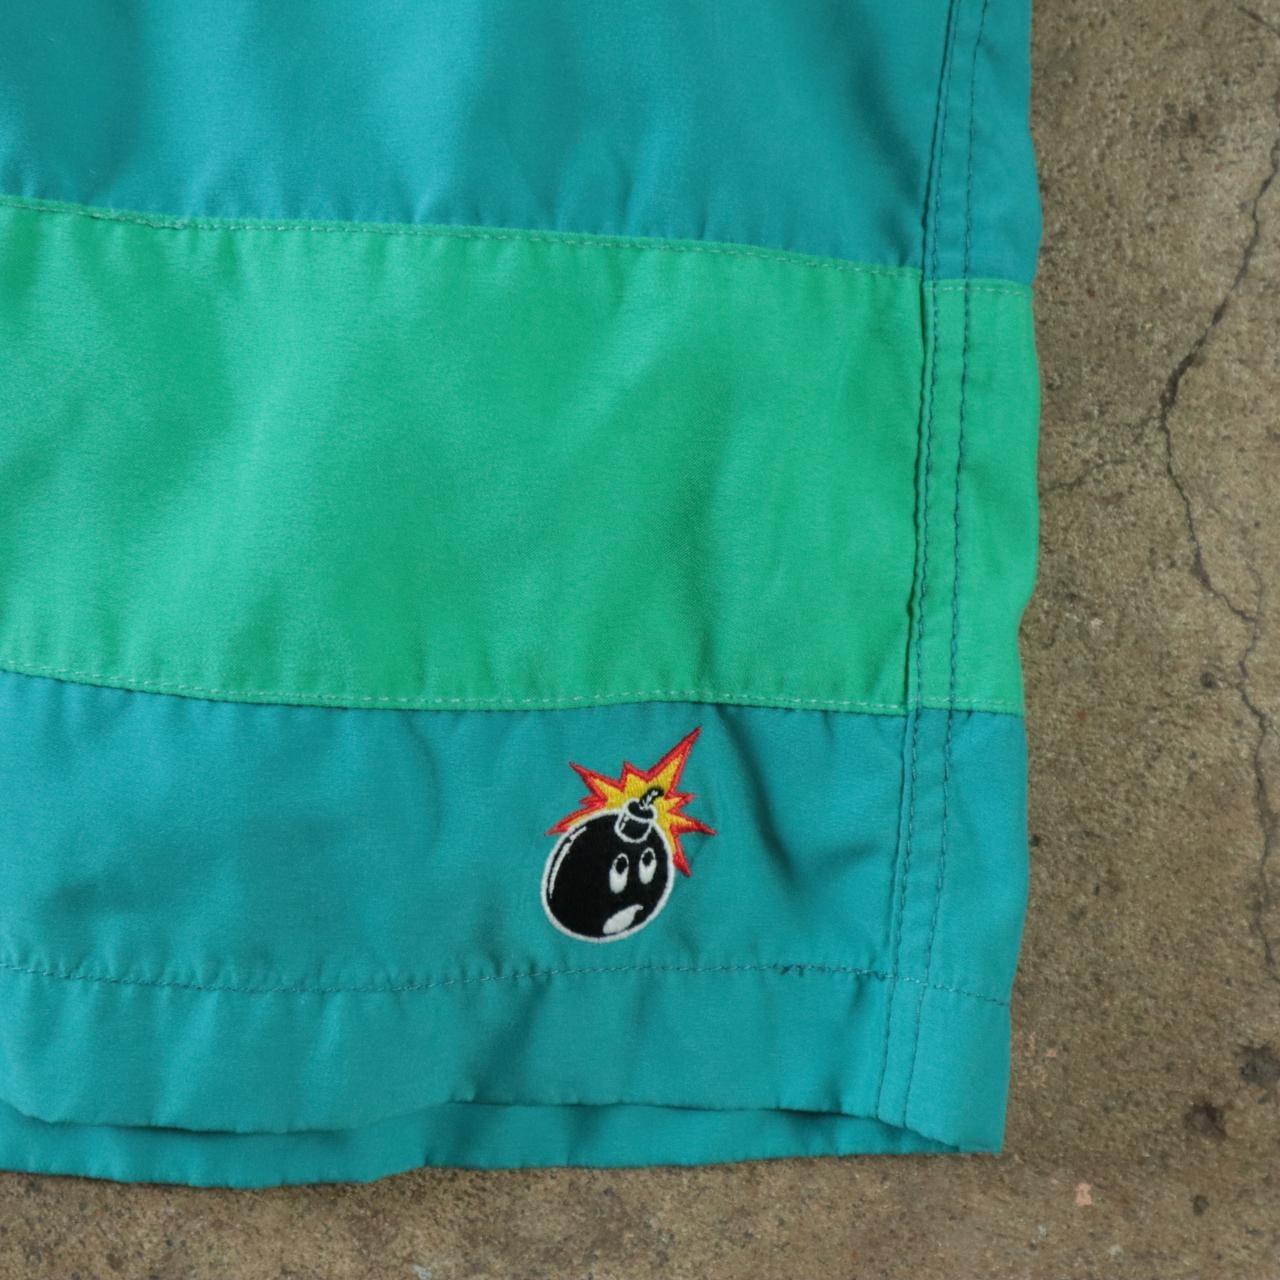 Product Image 2 - The Hundreds Beach Shorts

Striped color